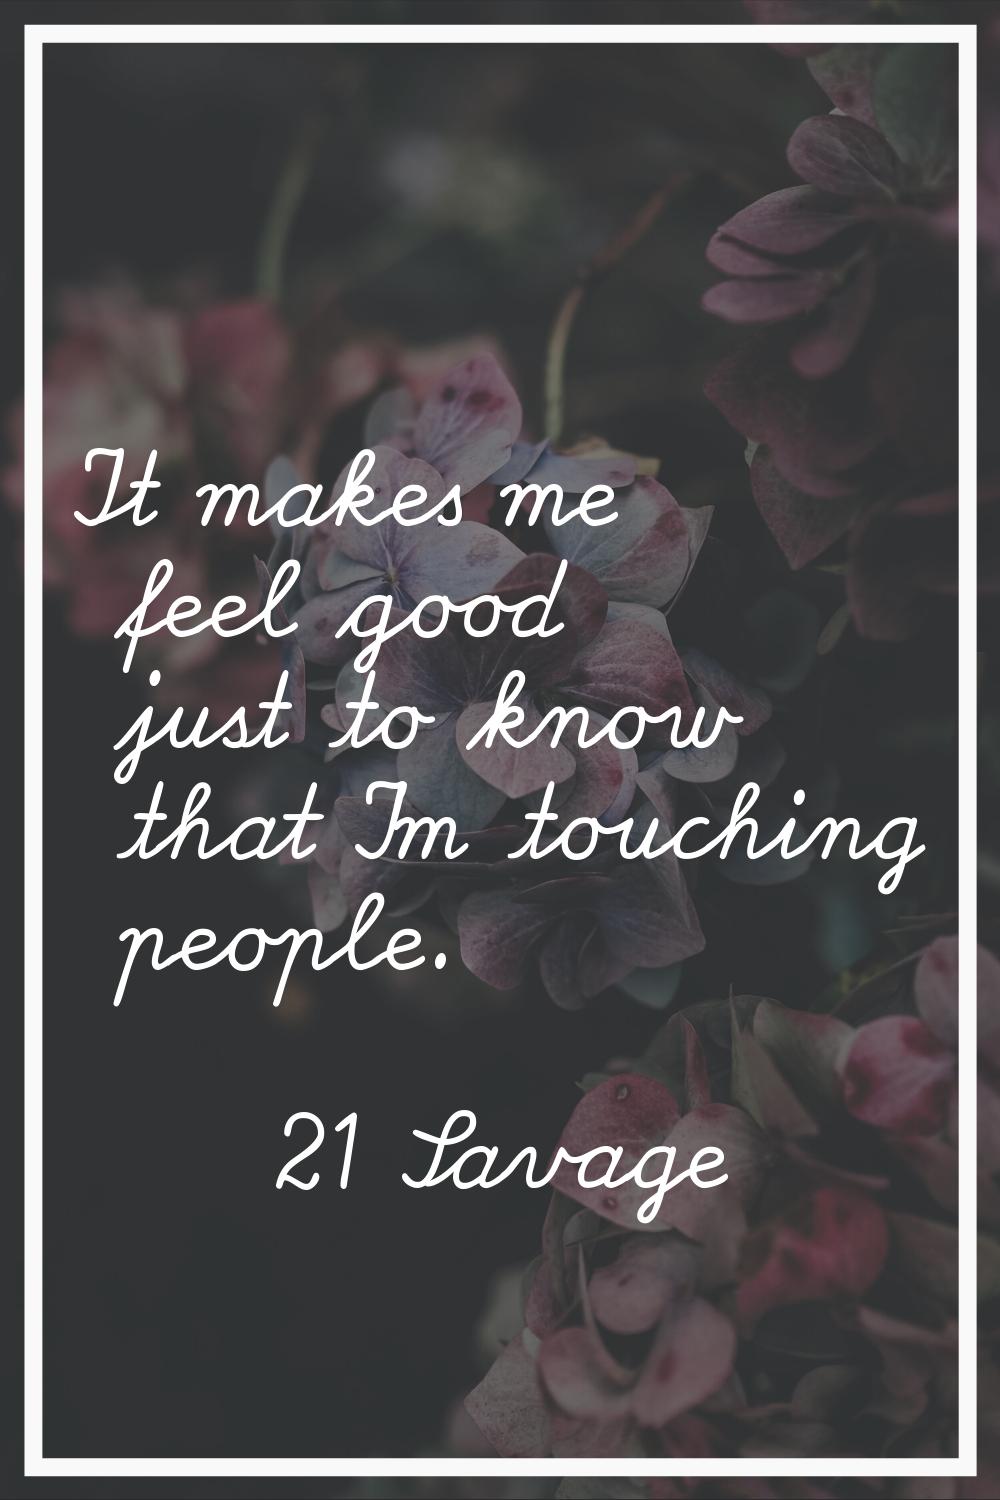 It makes me feel good just to know that I'm touching people.